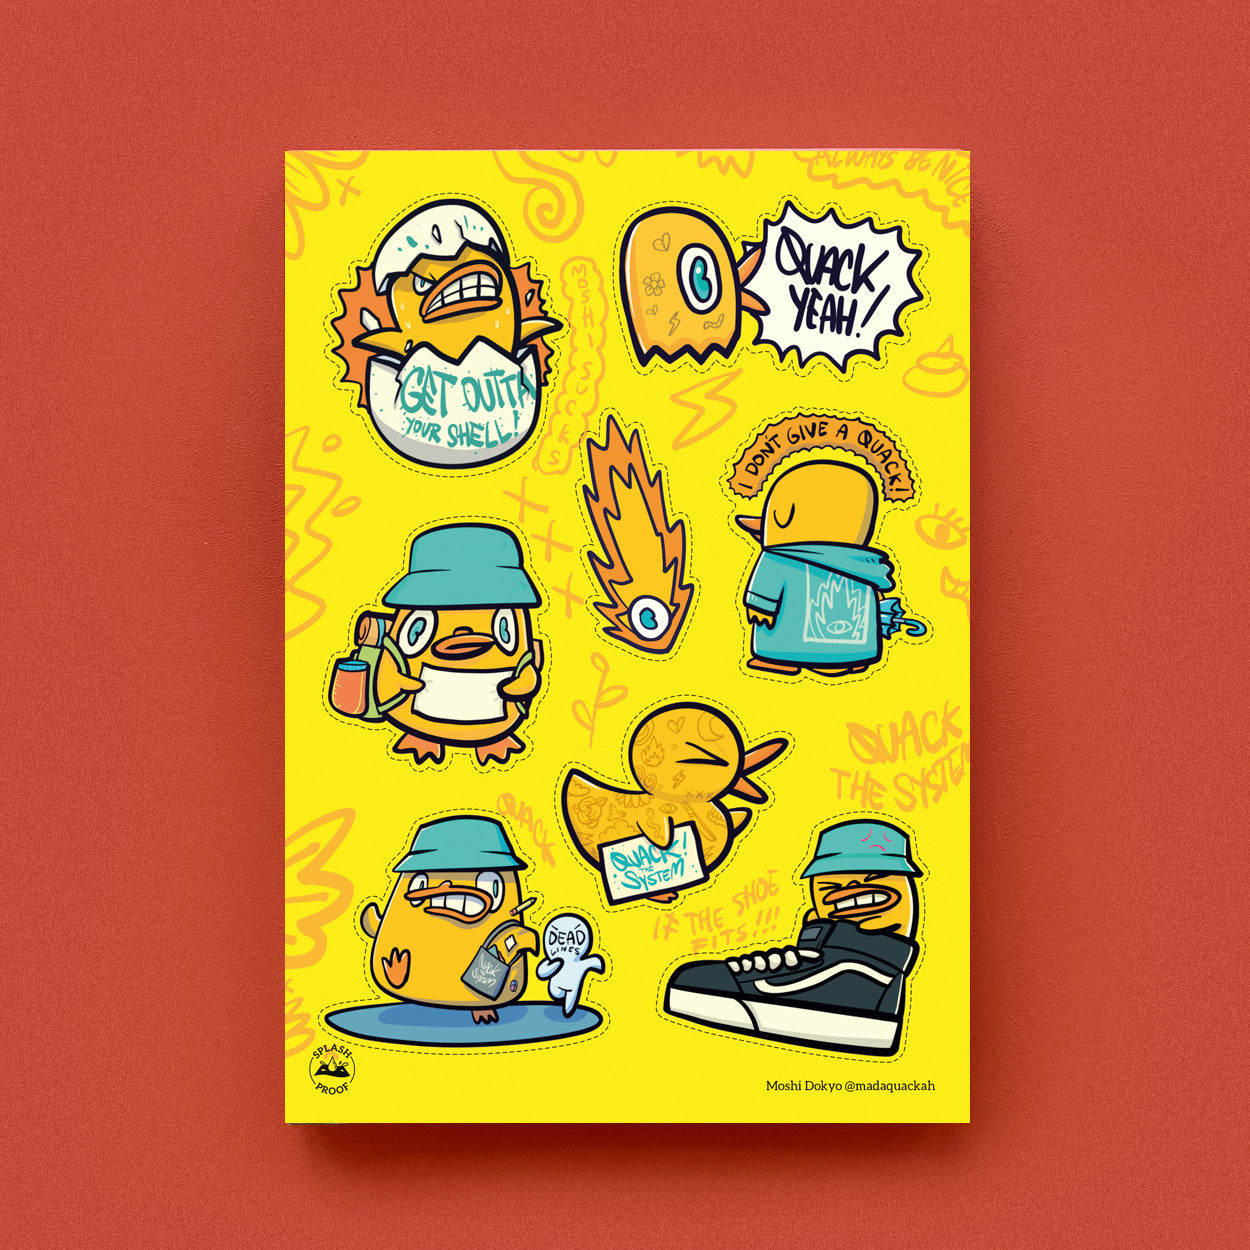 Gentle People Dumaguete City artist art craft book stickers sticker cute creative gift souvenir solution travel tourism Belfry tricycle Cil Flores sticker page journal journaling scrapbooking hobby art collector Dumaguete city exhibition Moshi Dokyo